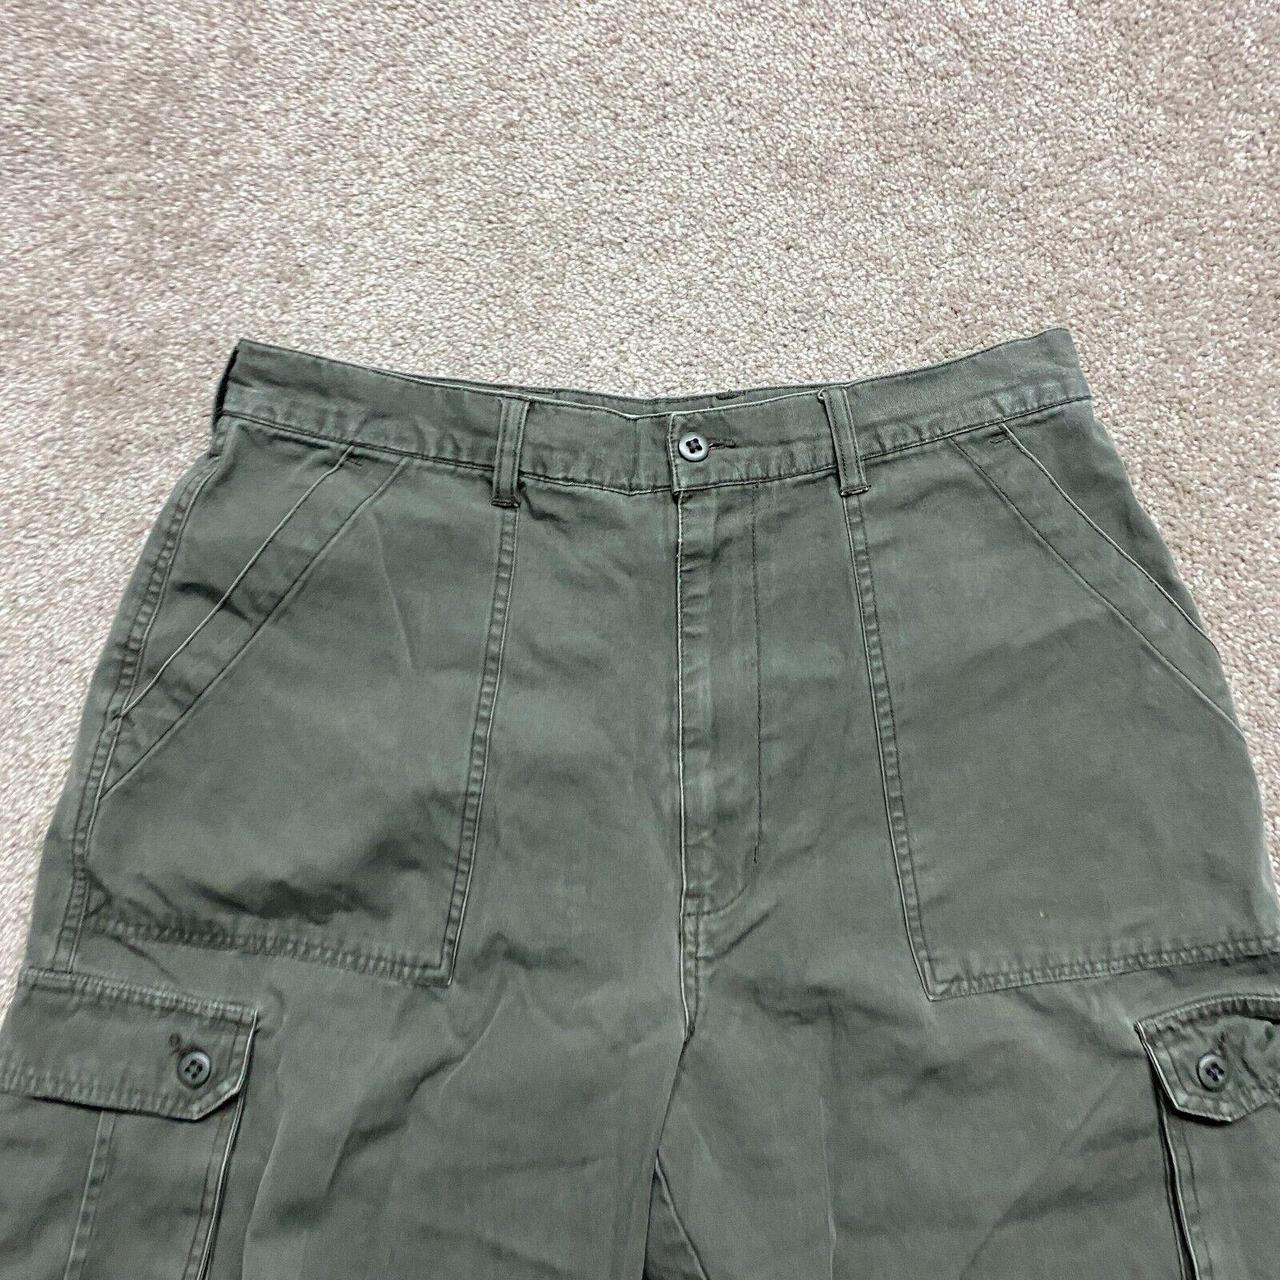 Utility Men's Brown and Green Shorts (2)